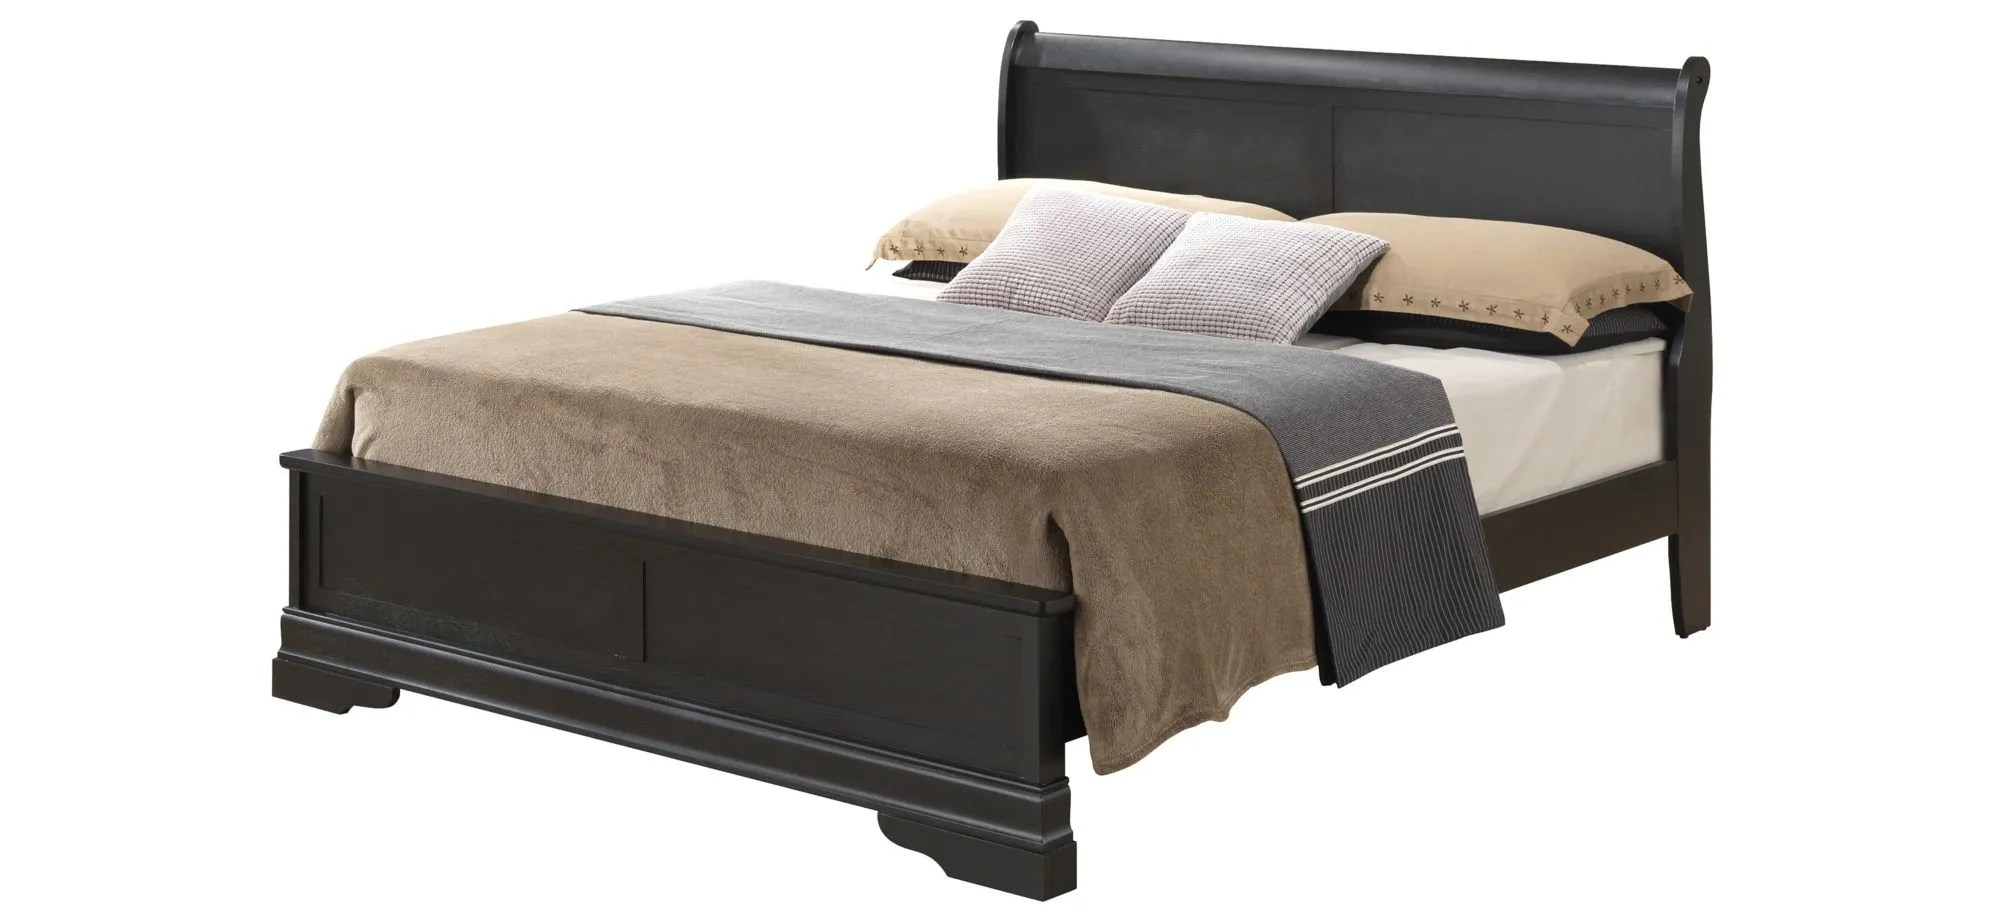 Rossie Panel Bed in Black by Glory Furniture